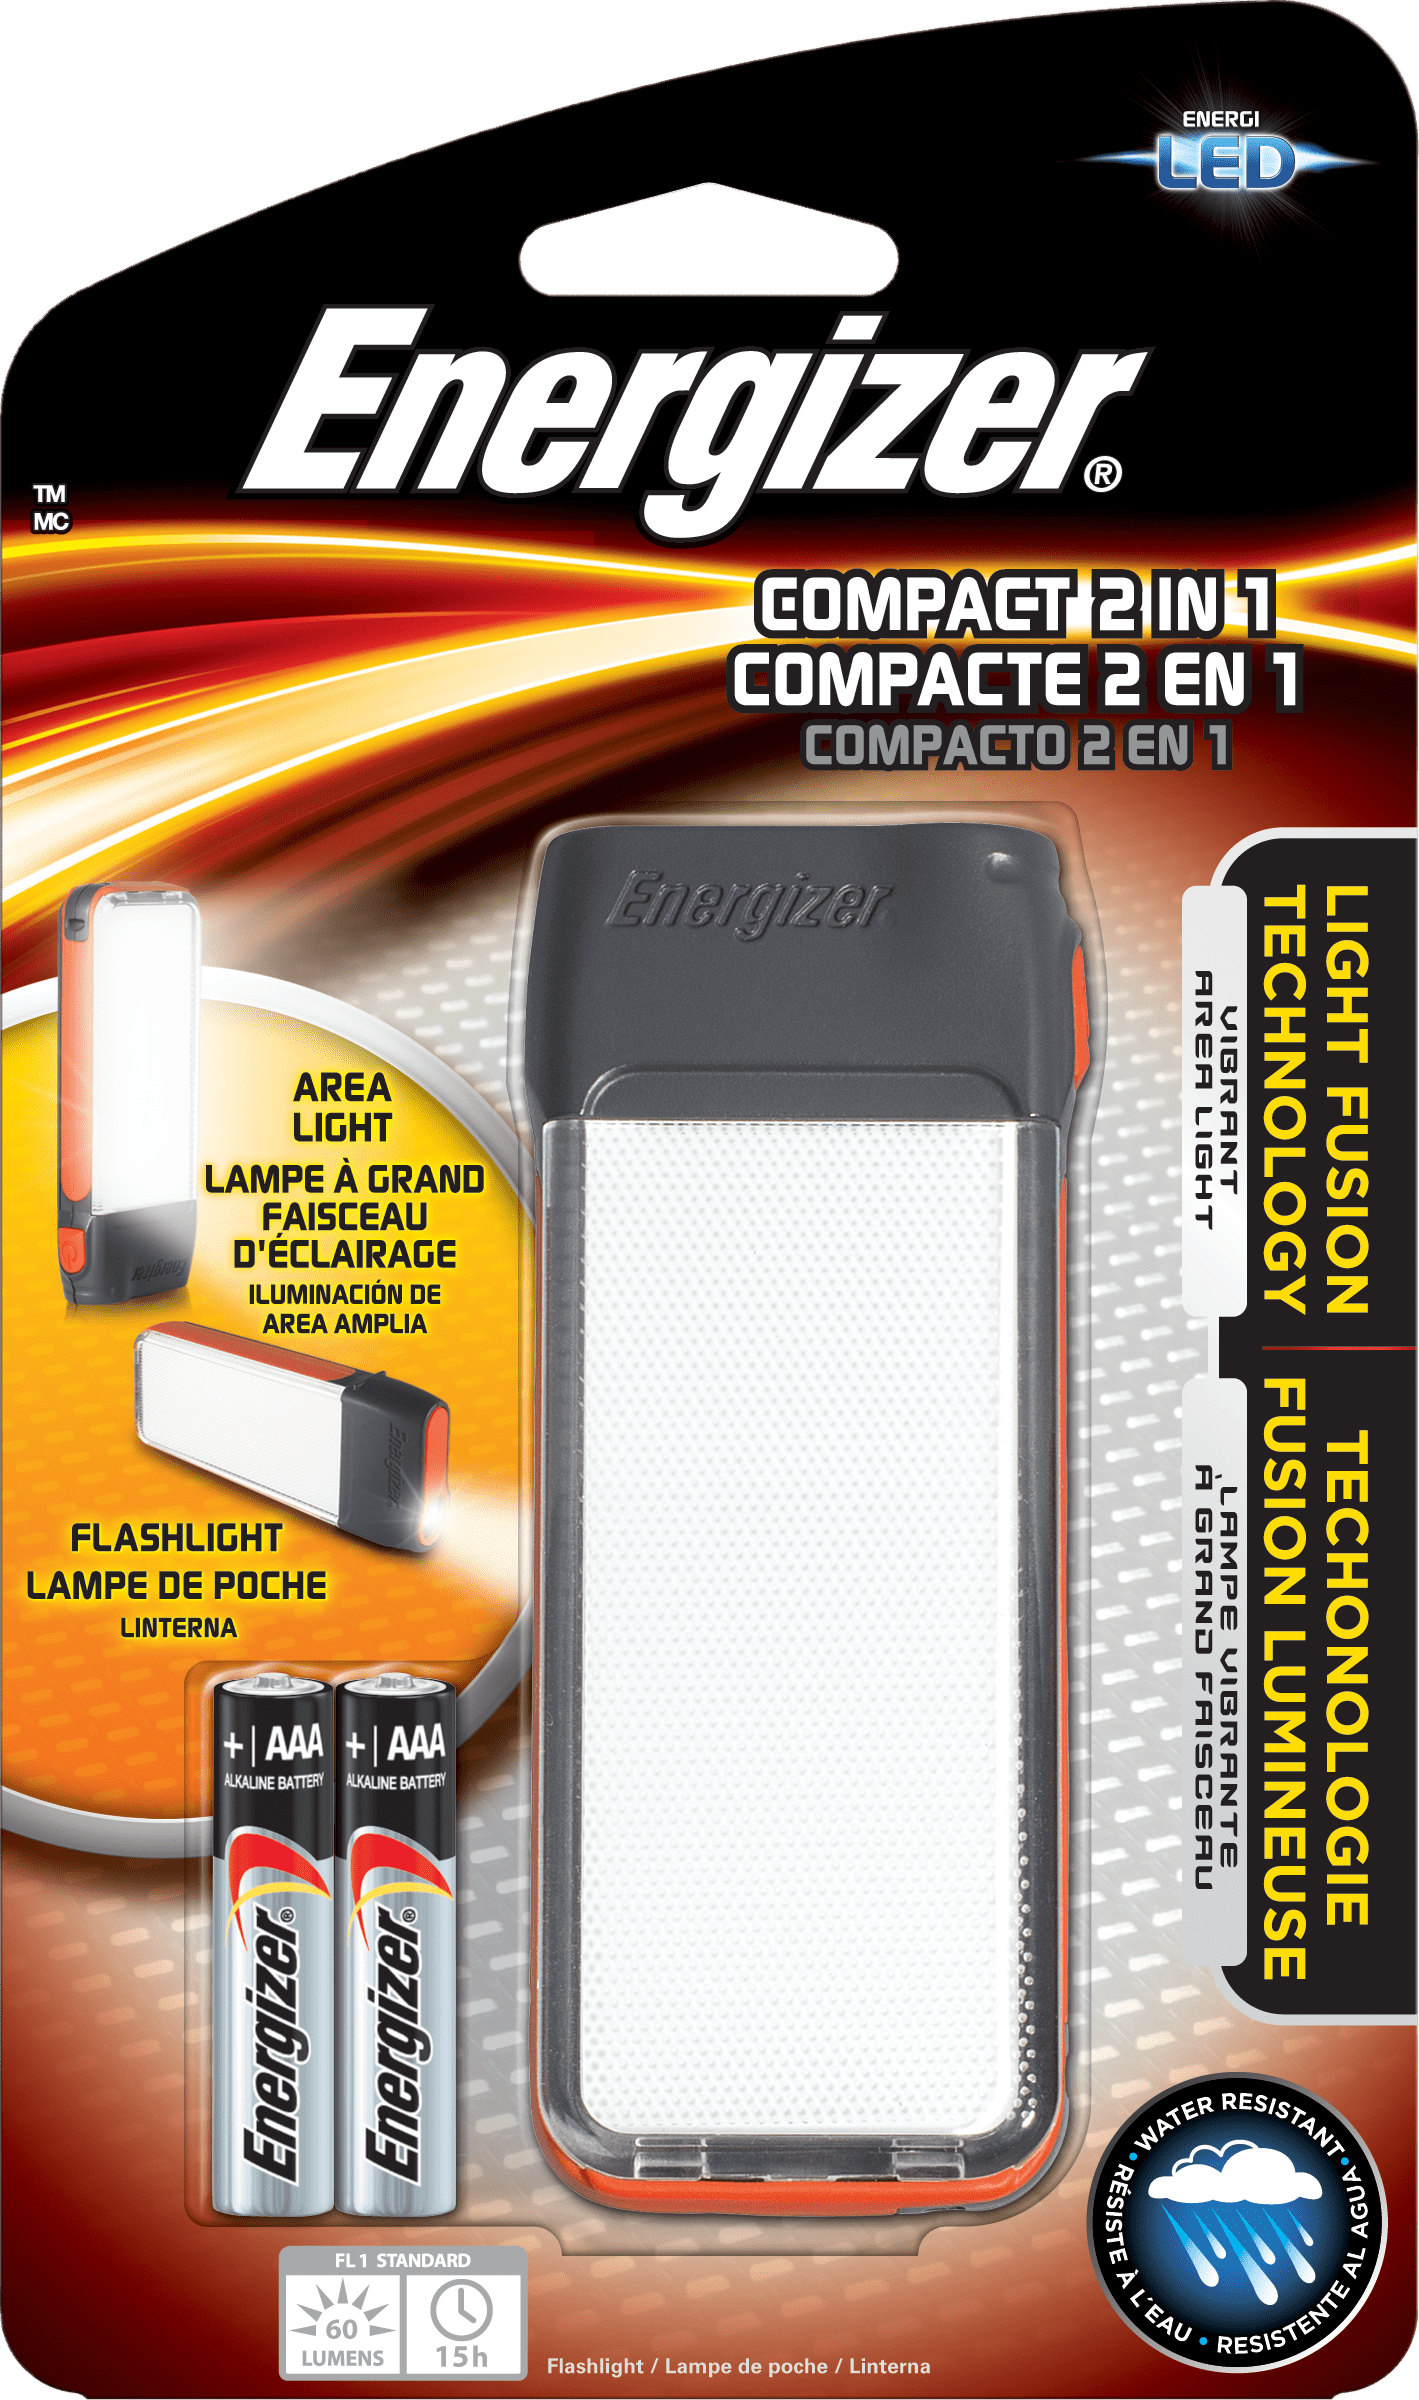 Energizer ENFCH22E Light Fusion Compact 2-in-1 Handheld Light New 